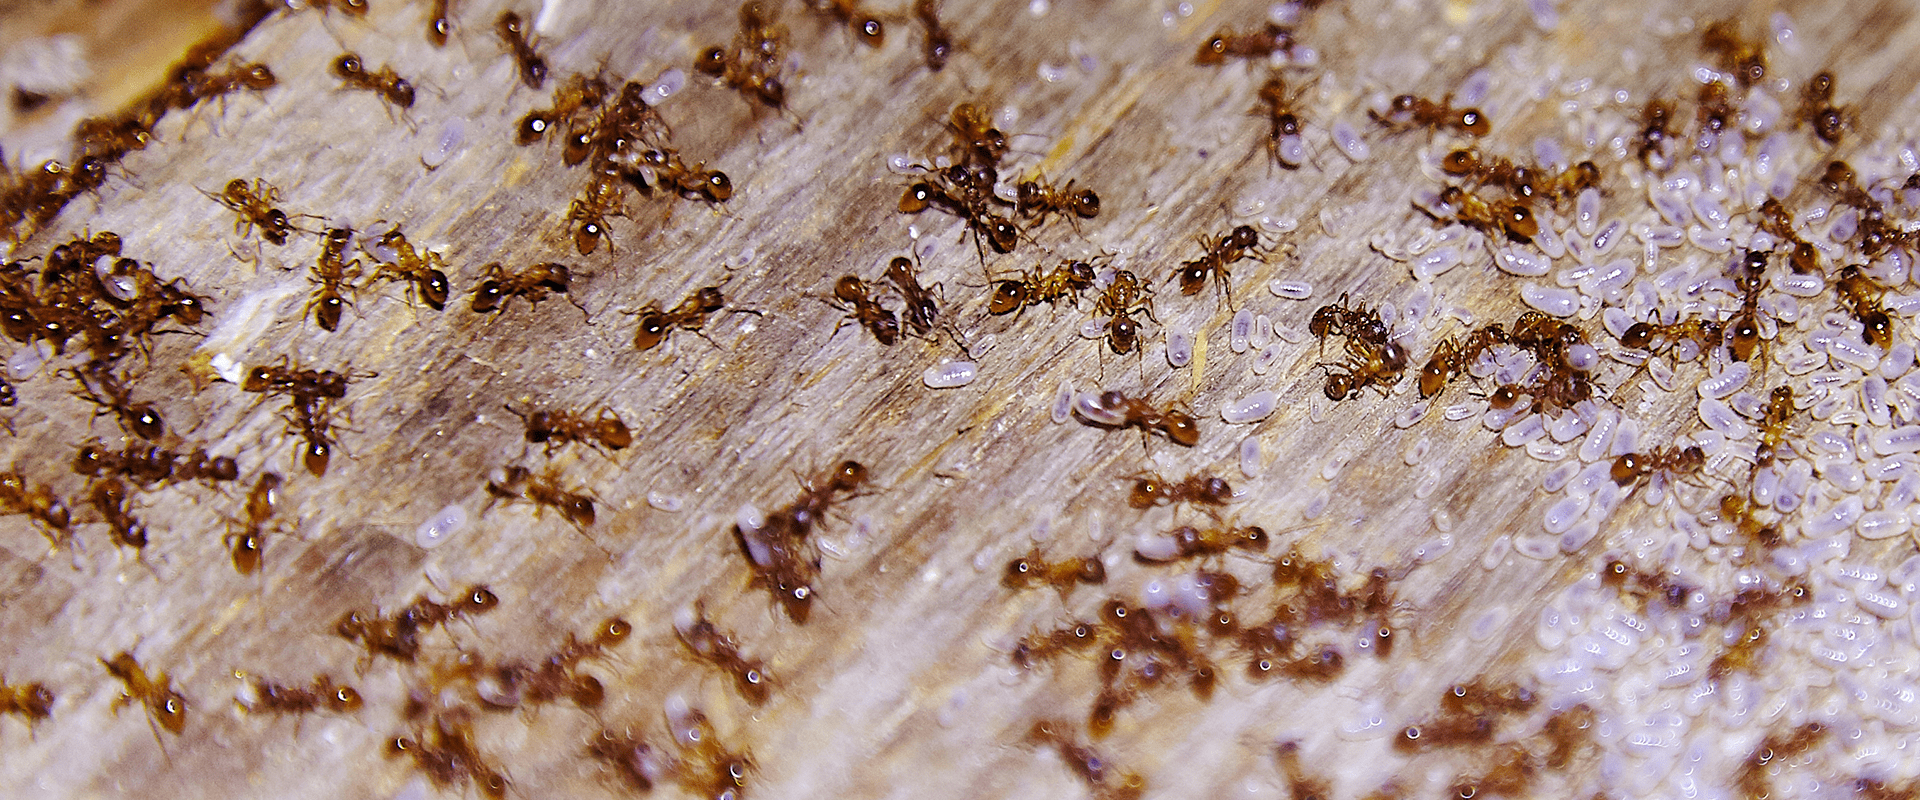 many ants crawling on a house porch in woodburn oregon